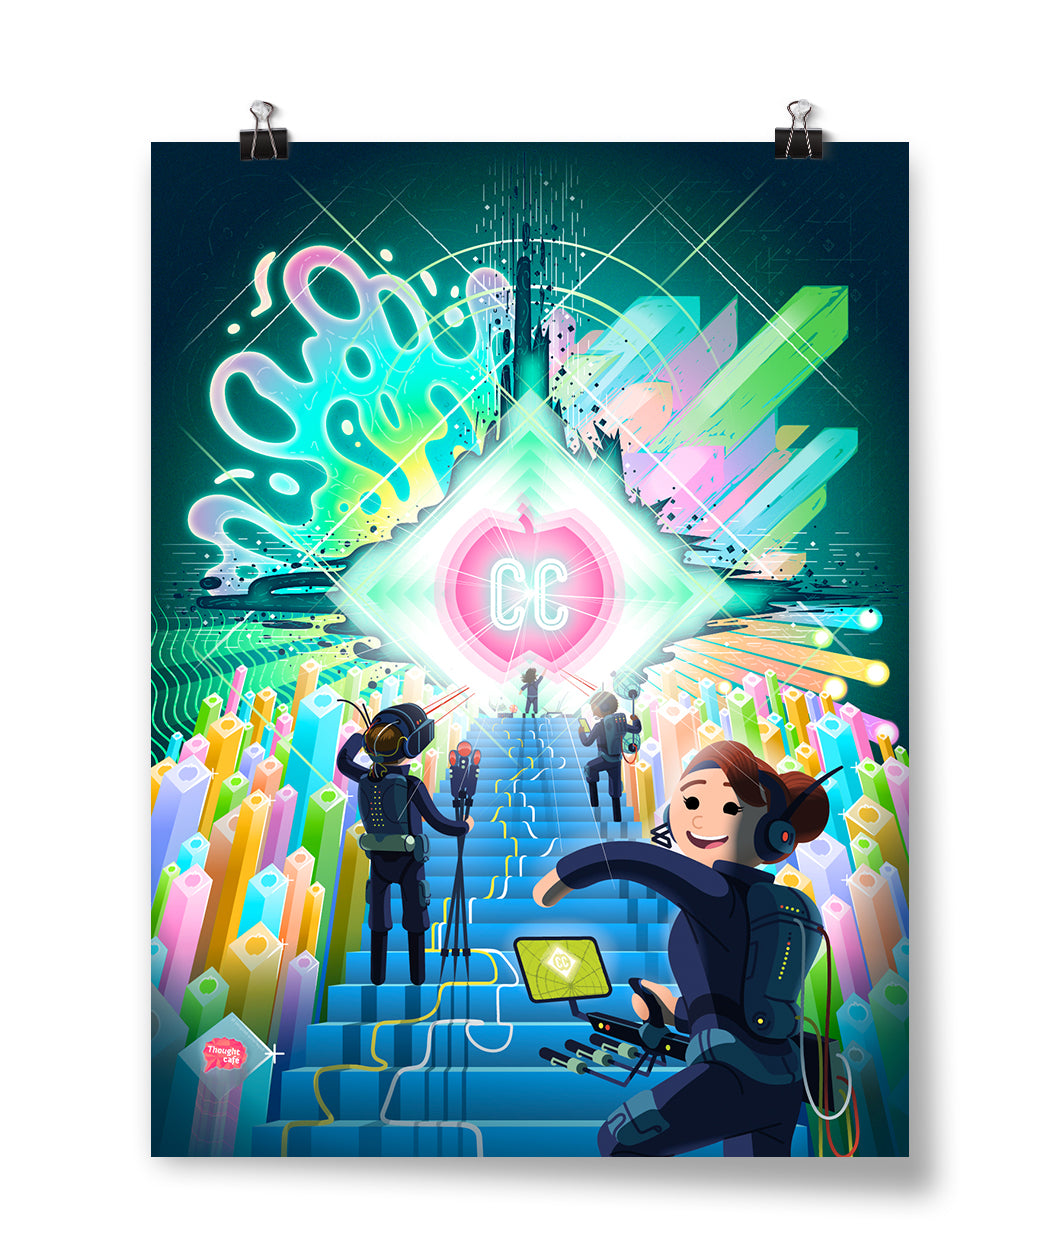 A drawing of figures in black VR suits on a stairway that leads to a an explosion of light and color with a "CC" in the center - by CrashCourse